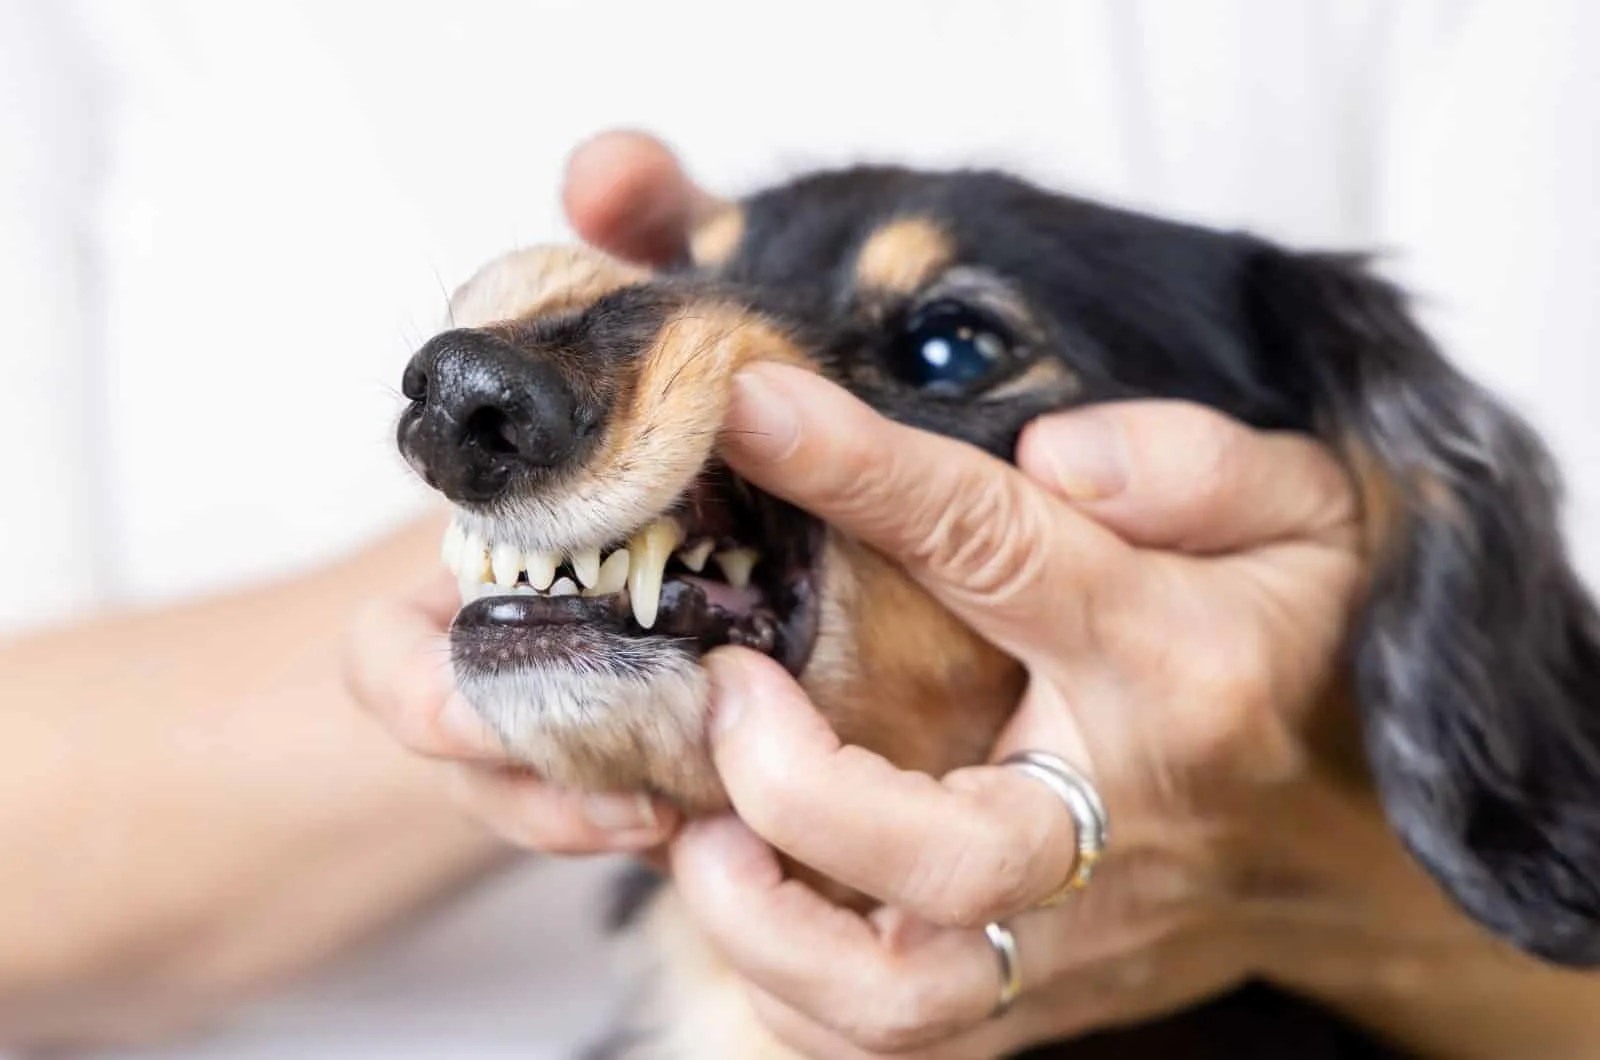 owner checking out dog's teeth